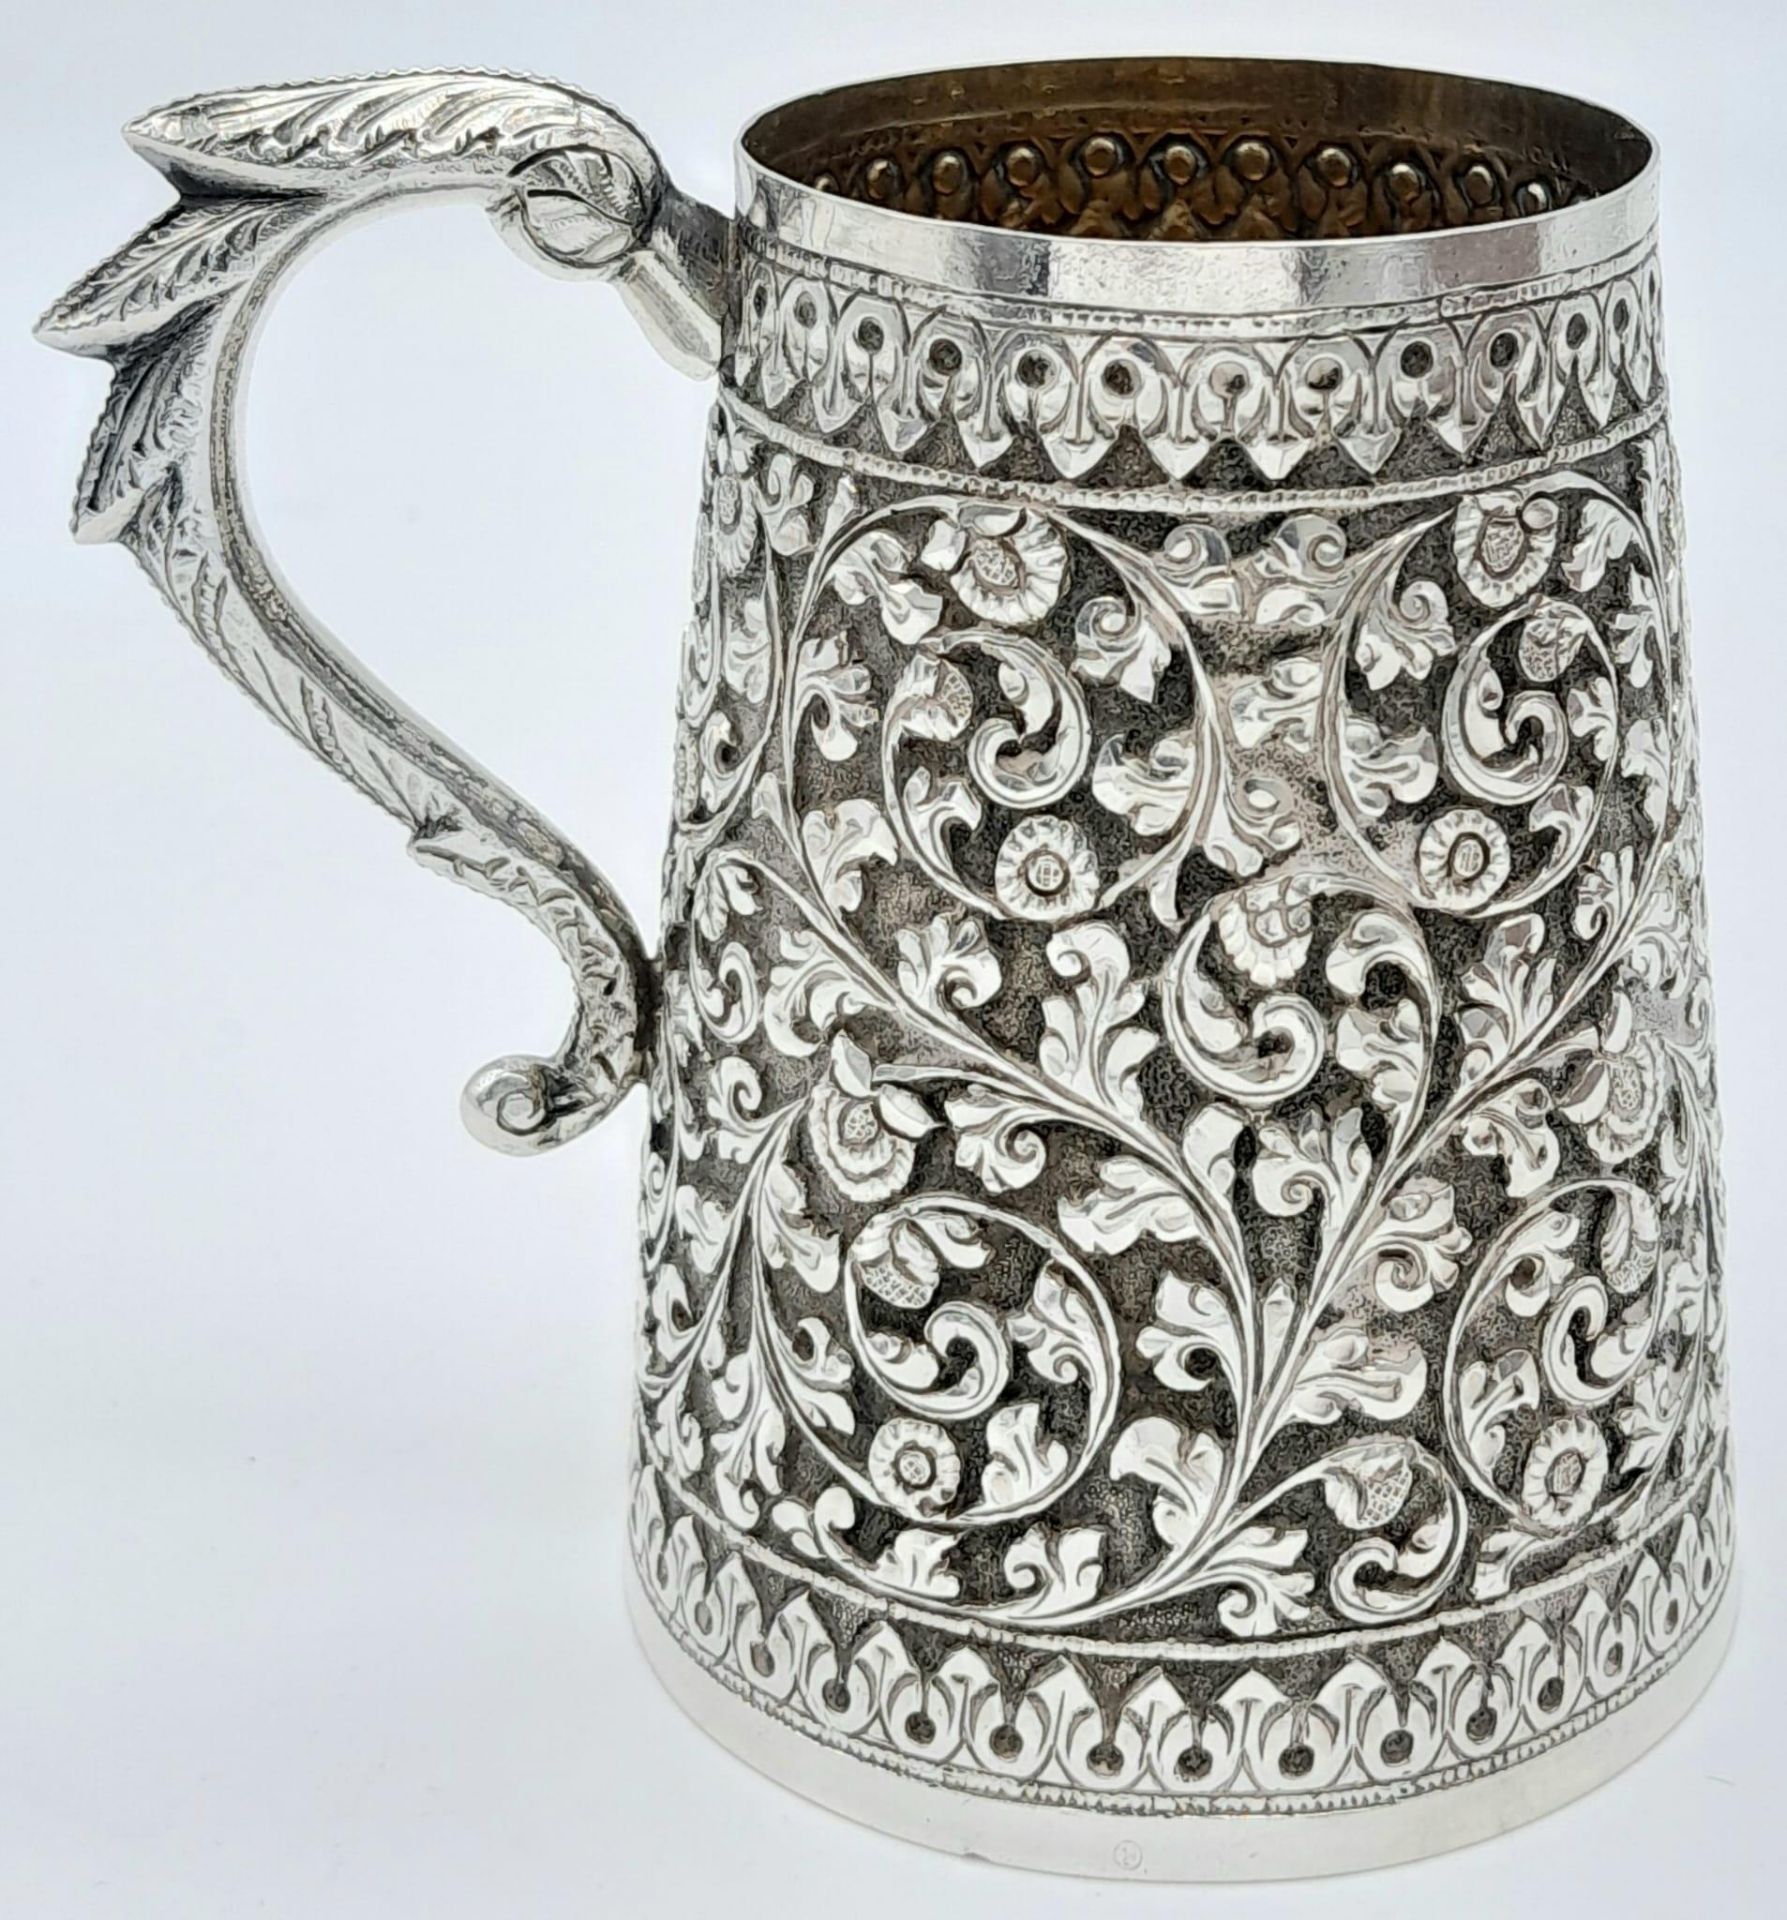 An Antique Indian Decorative Small Mug/Tankard - Comes in Original Fitted Wooden Box. Beautiful